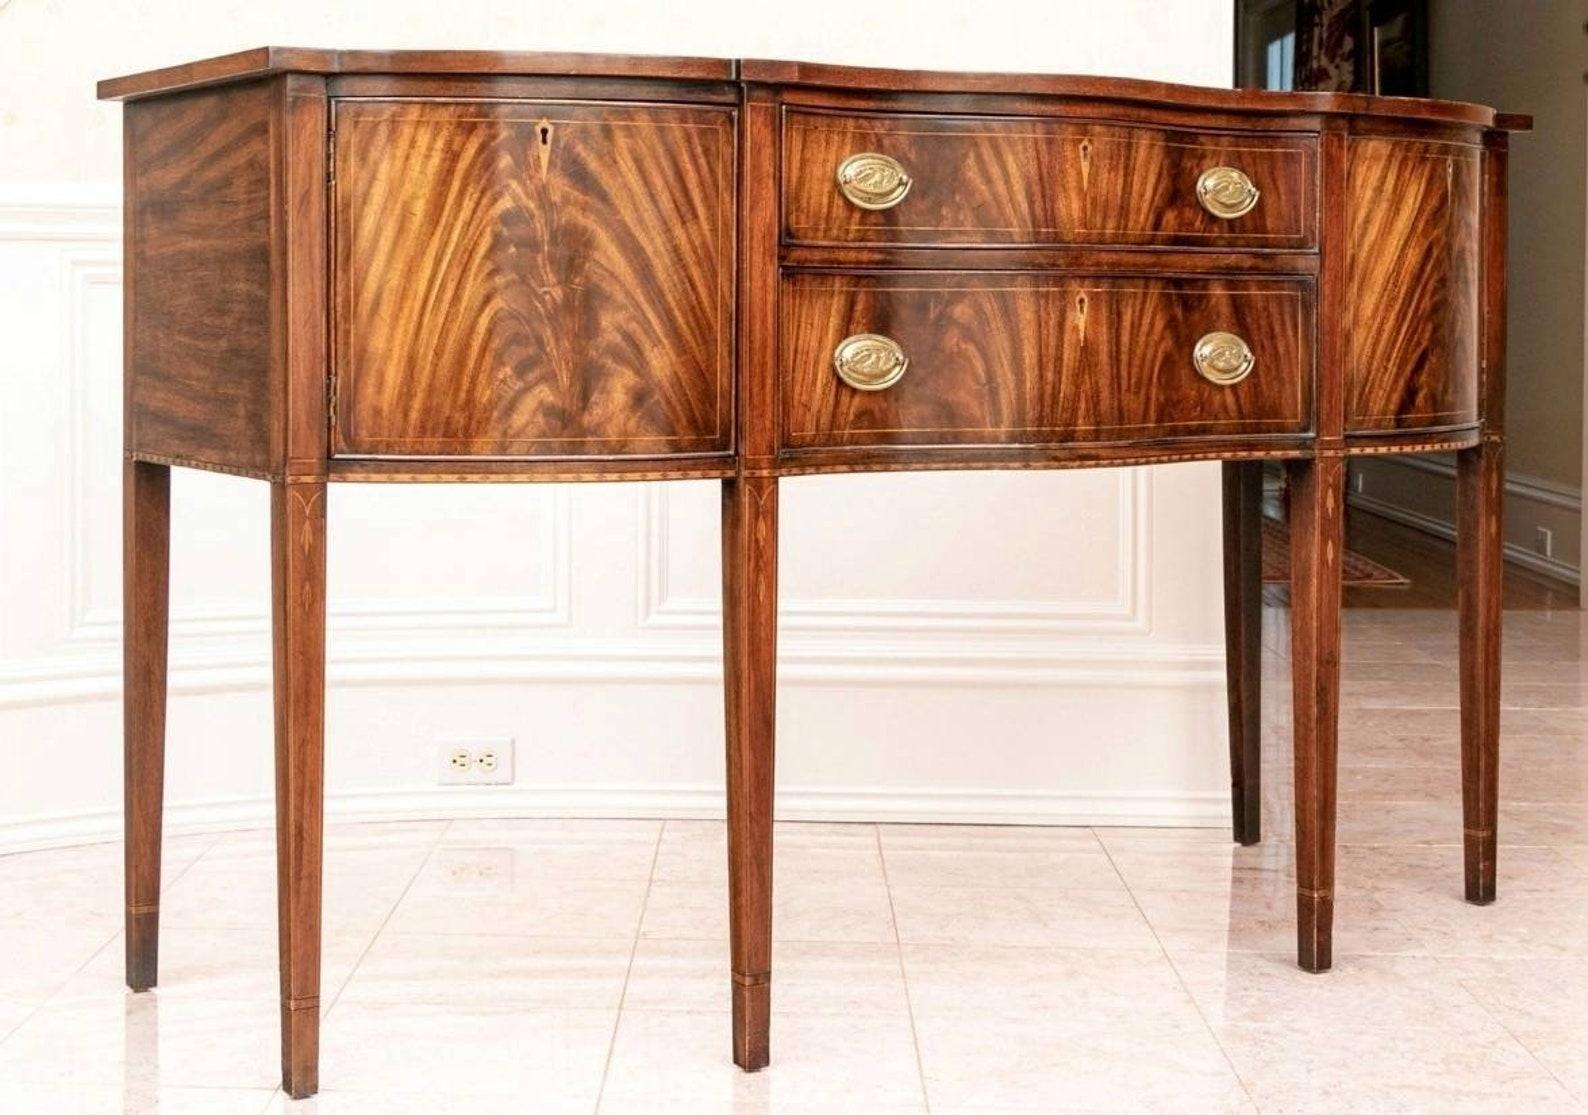 A stunning fine quality Federal style Virginia Galleries Henkel Harris flame mahogany sideboard.

Exquisitely hand-crafted in Winchester, Virginia, this large scale early 19th century antique reproduction dates to the second half of the 20th